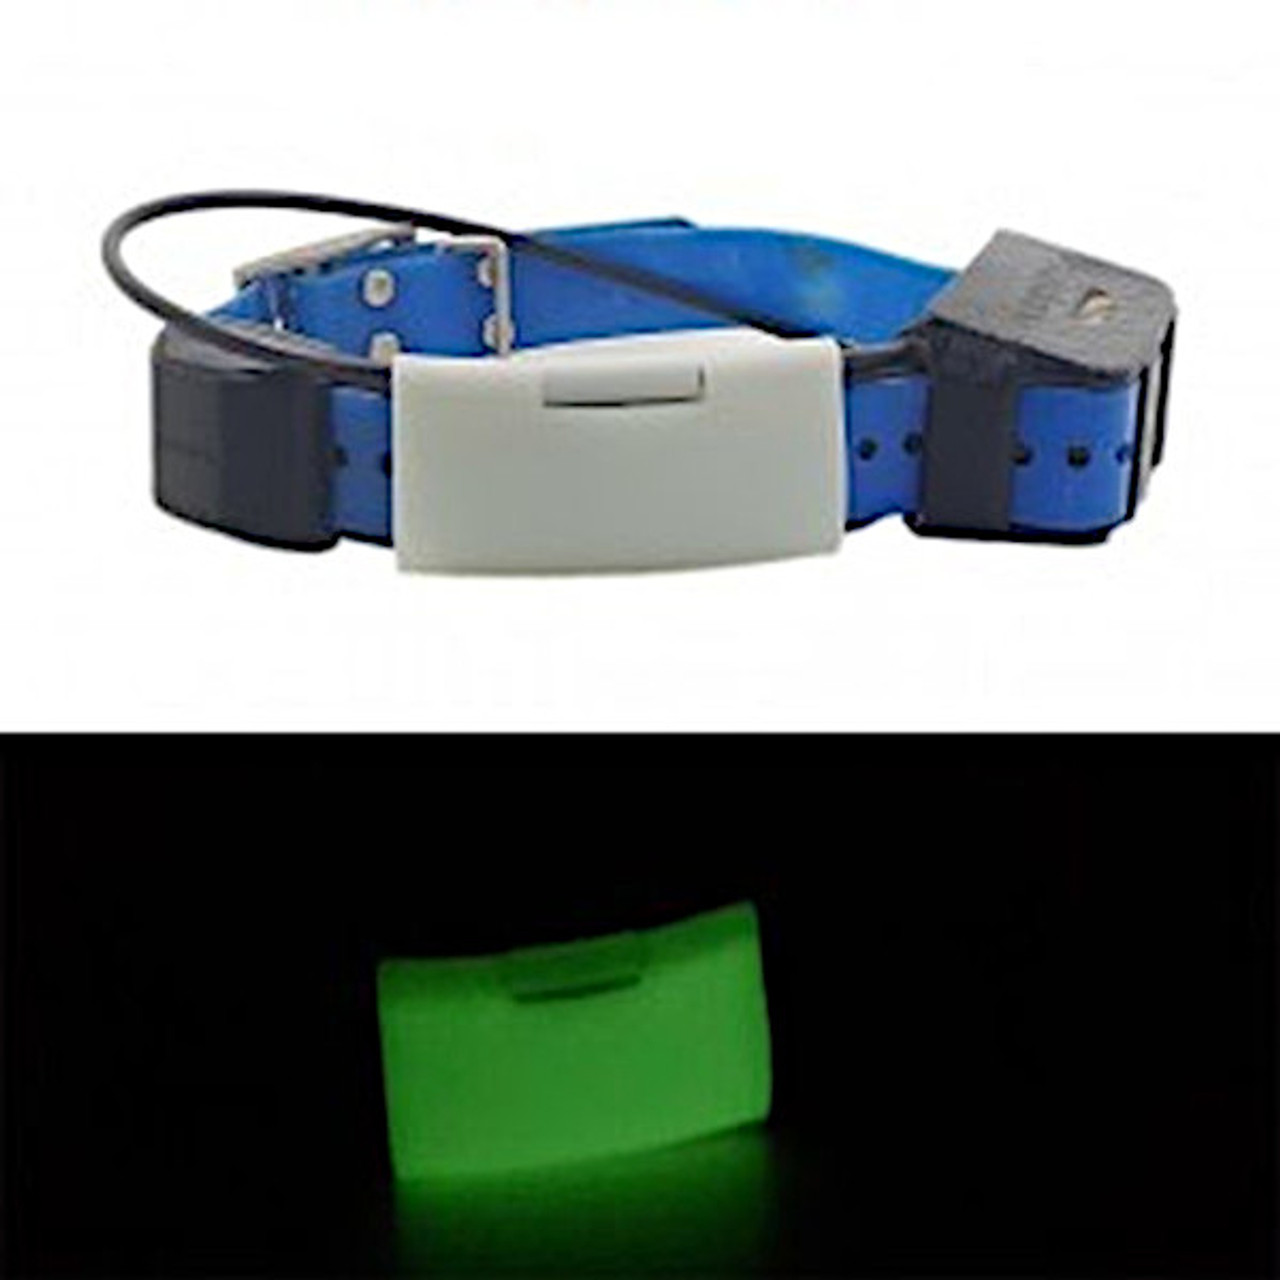 glow in the dark antenna keeper for garmin tracking devices at okie dog supply